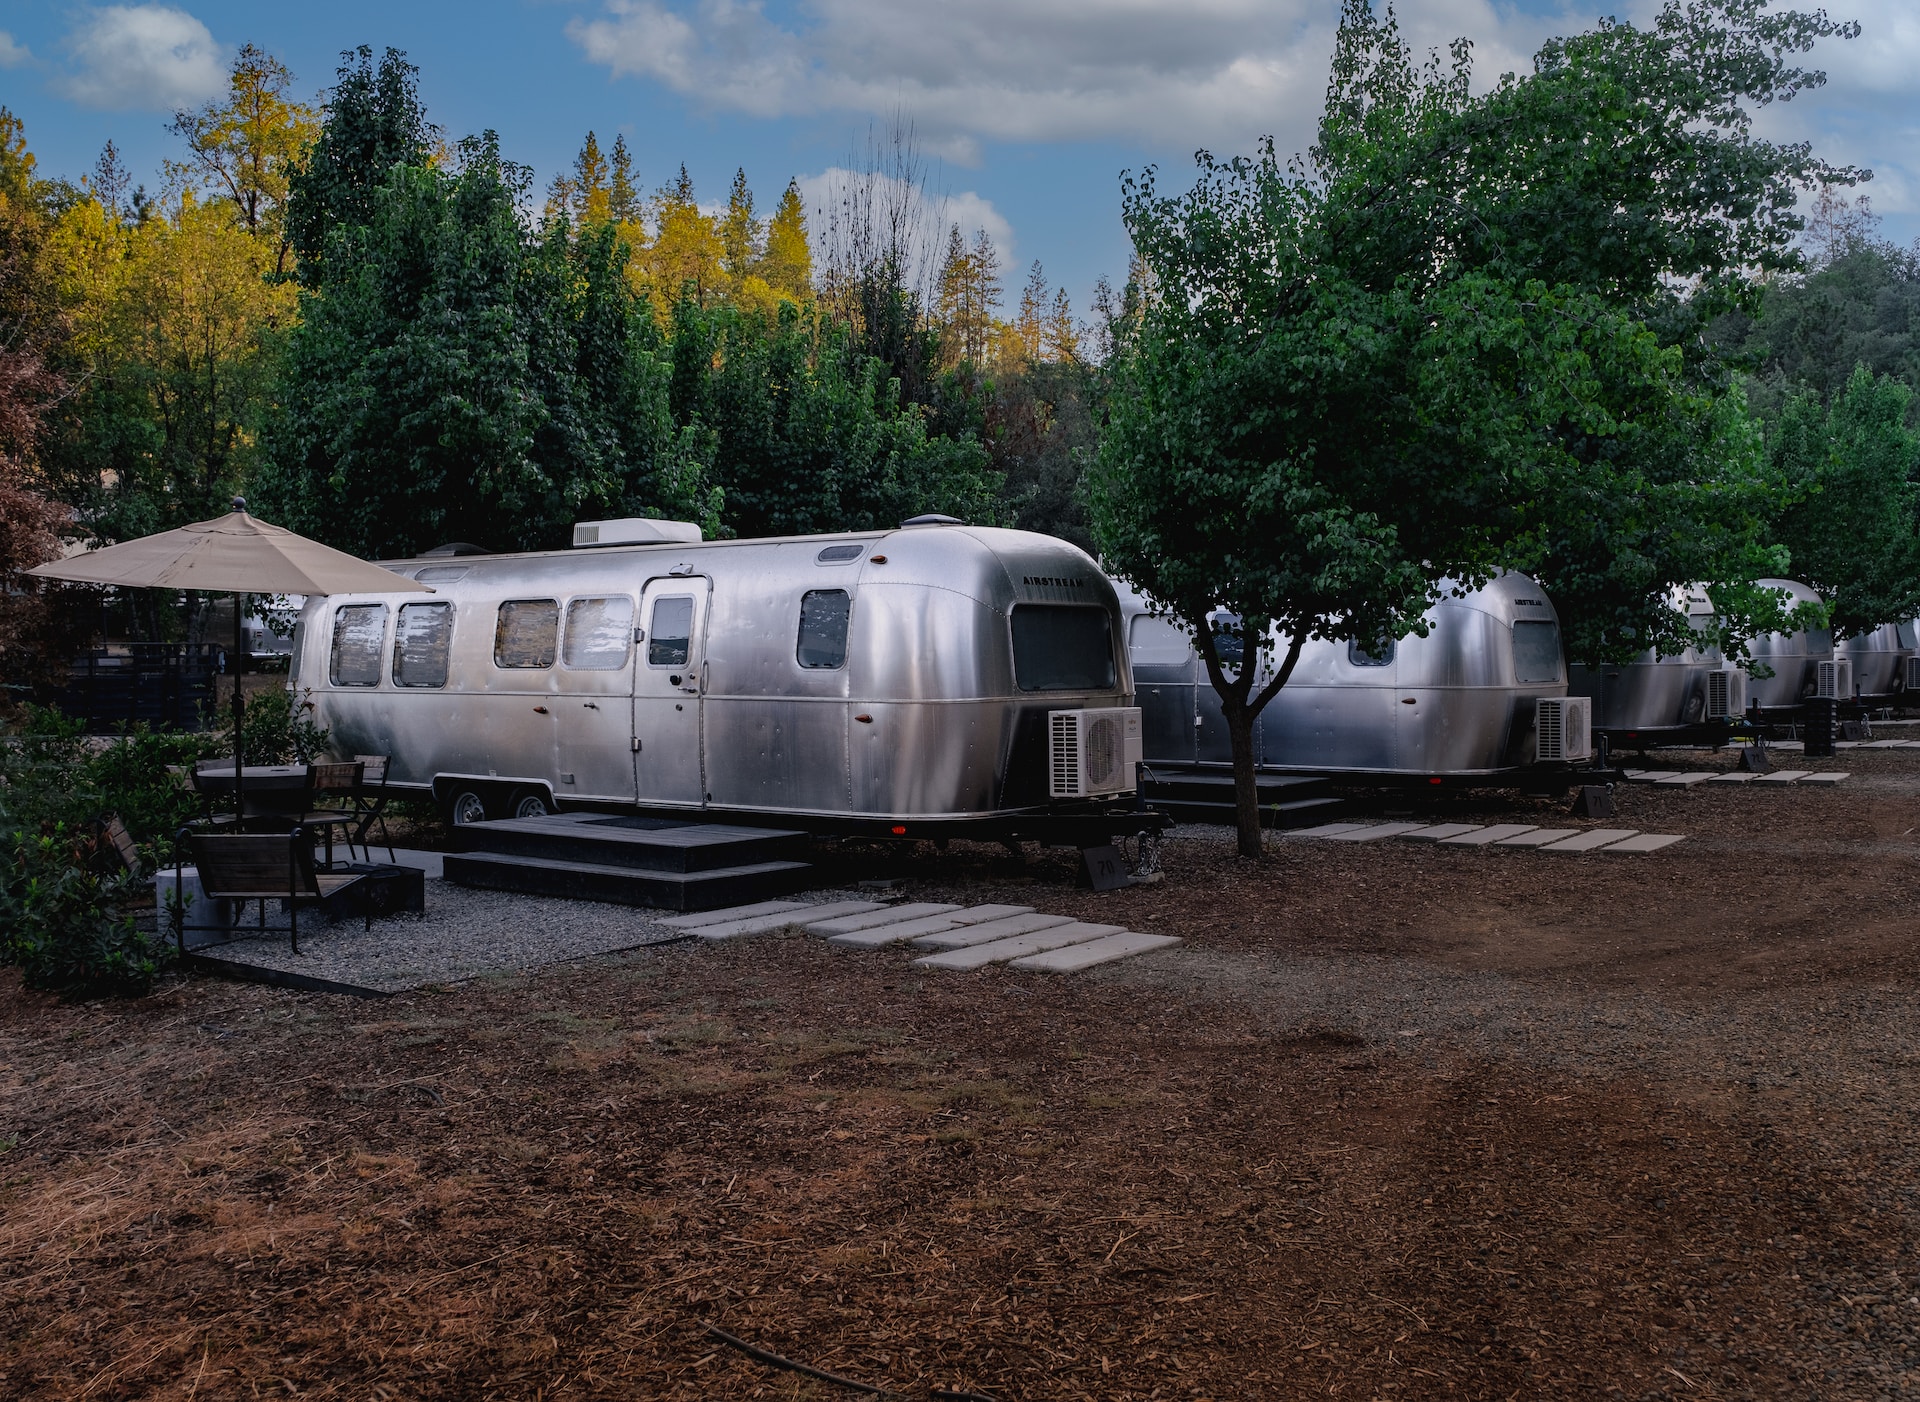 Multiple Airstream trailers parked in Yosemite.